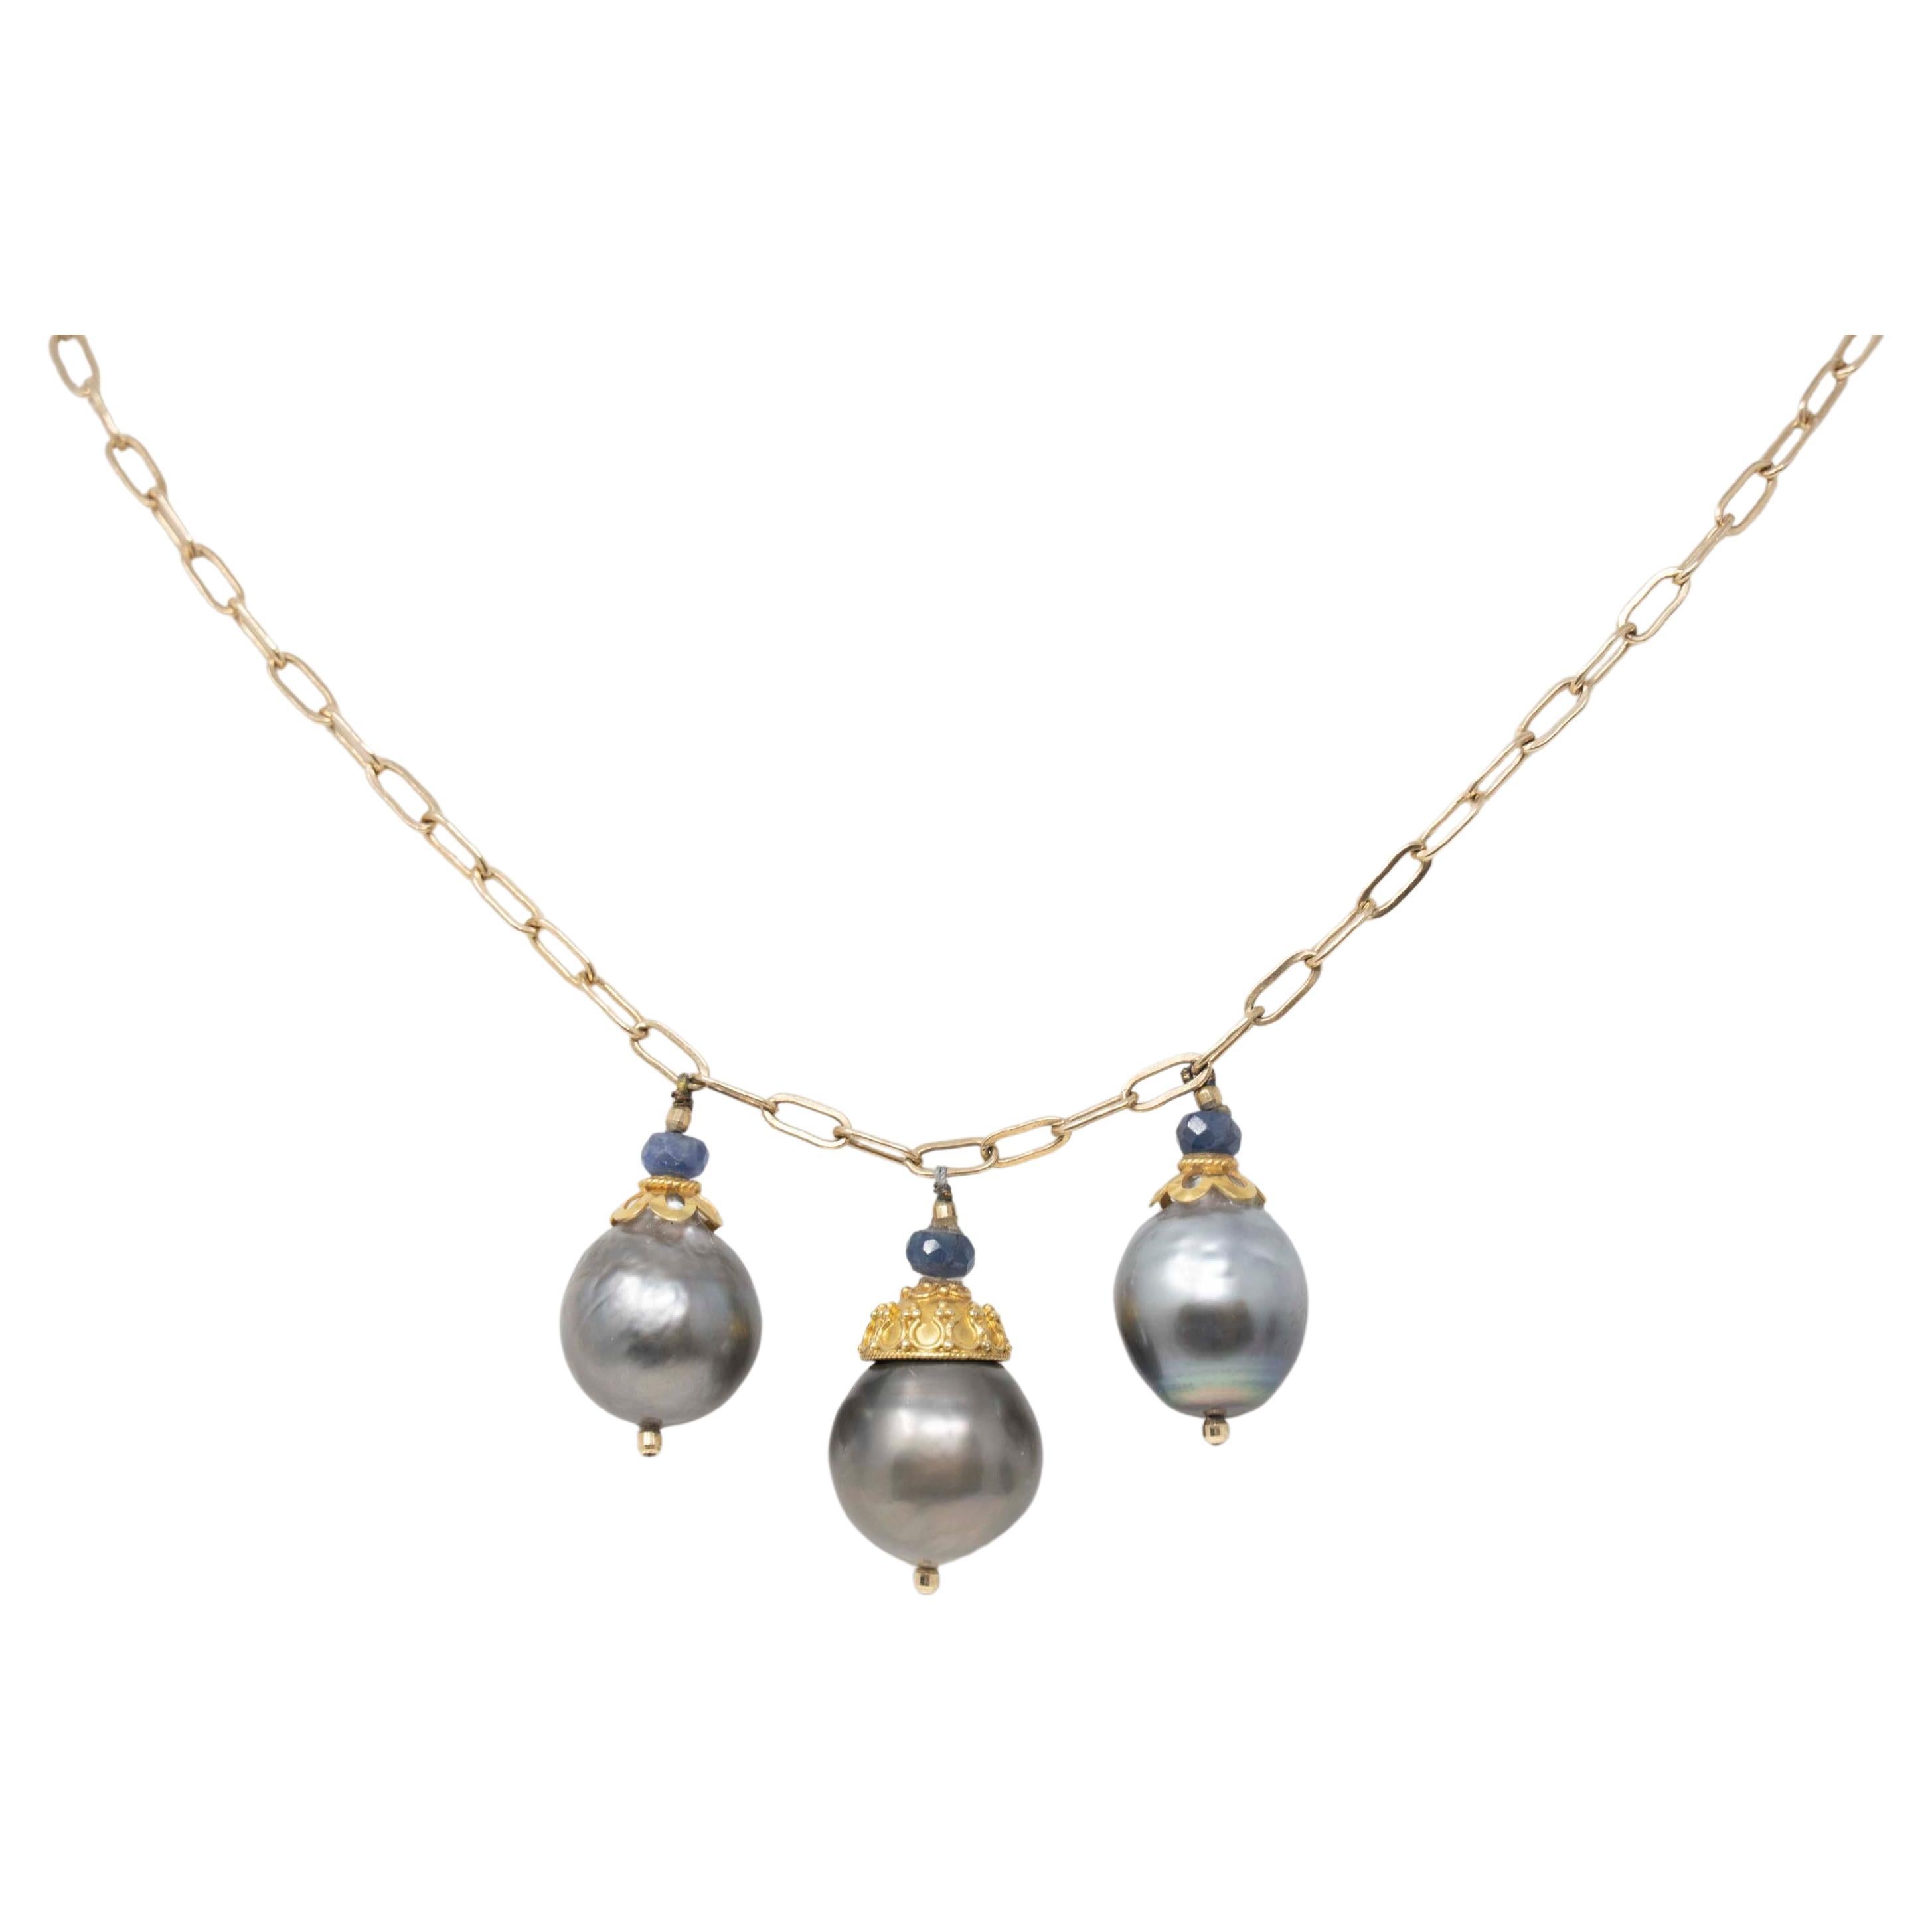 Three Baroque Cultured Tahiti Pearls & 14k Gold Necklace For Sale